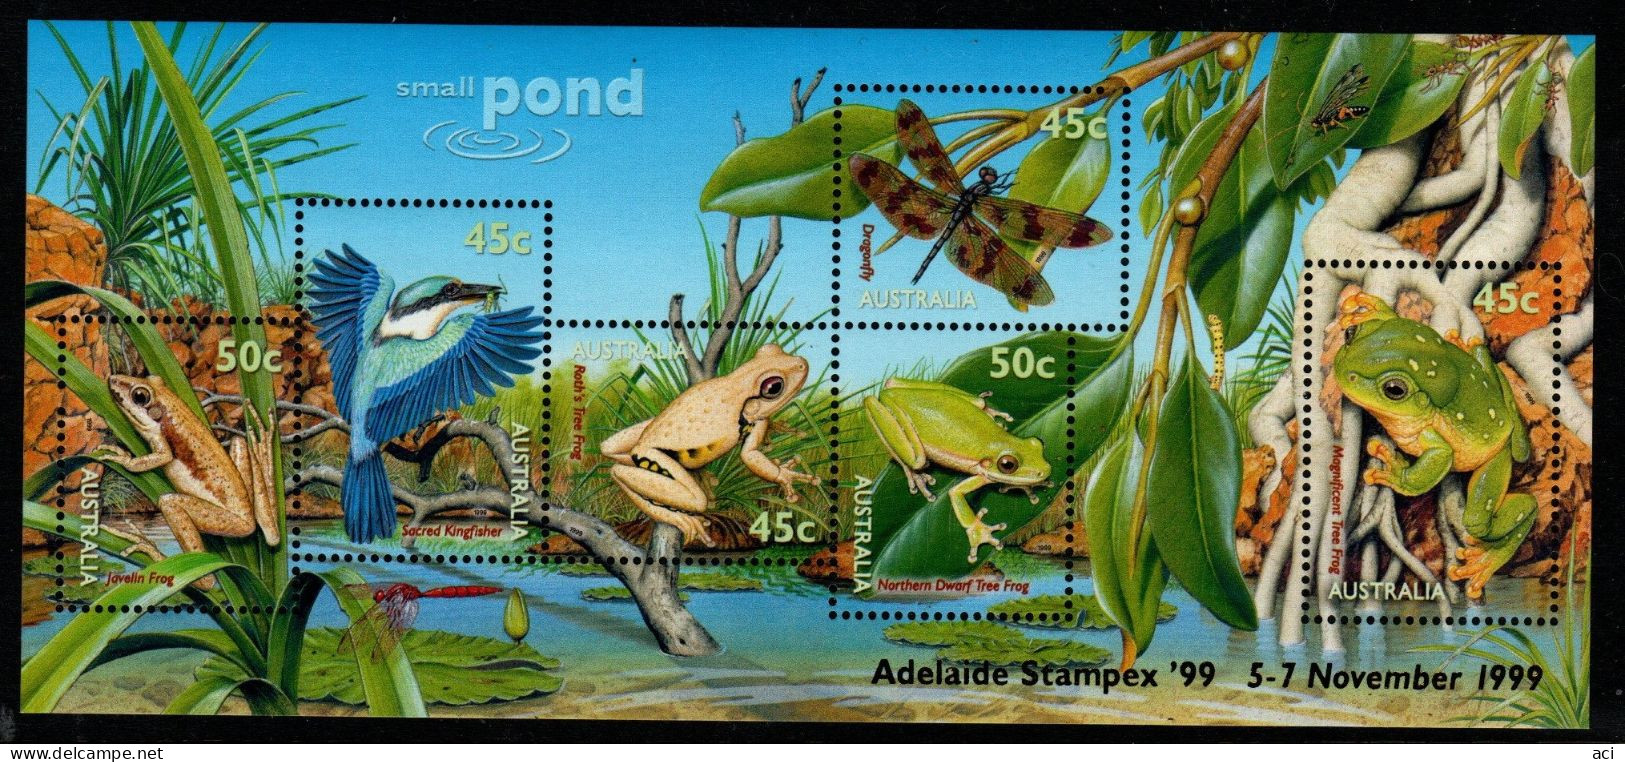 Australia  1999 Small Pond Opt Adelaide Stampex99 In Gold ,souvenir Sheet,,Mint Never Hinged - Neufs